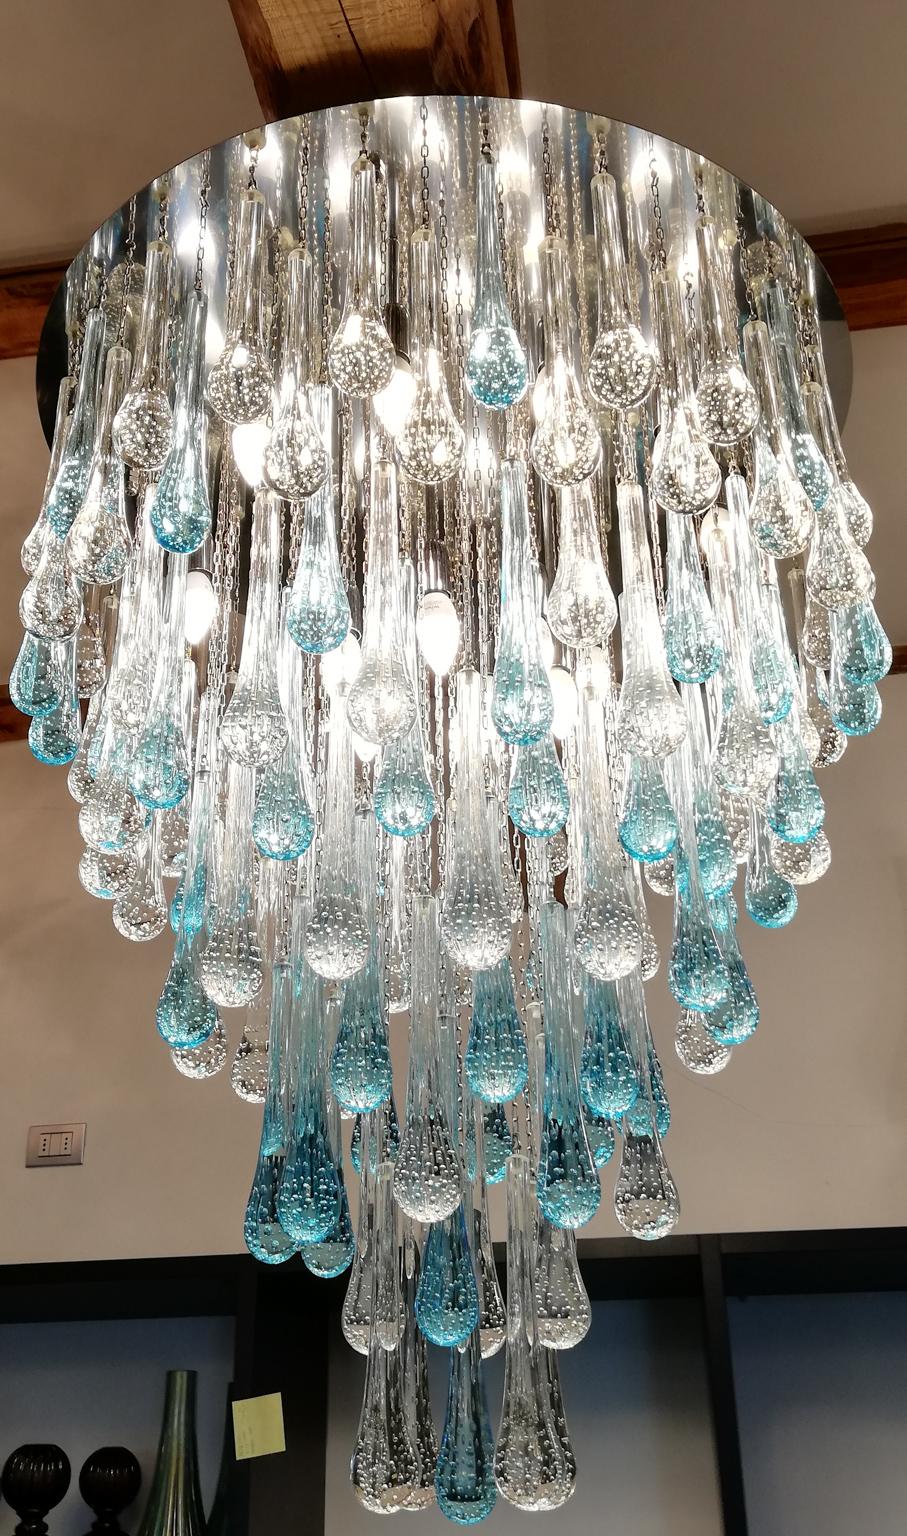 Franco Luce Mid-Century Modern Crystal Murano Glass Chandelier Gocce, 1980 For Sale 12